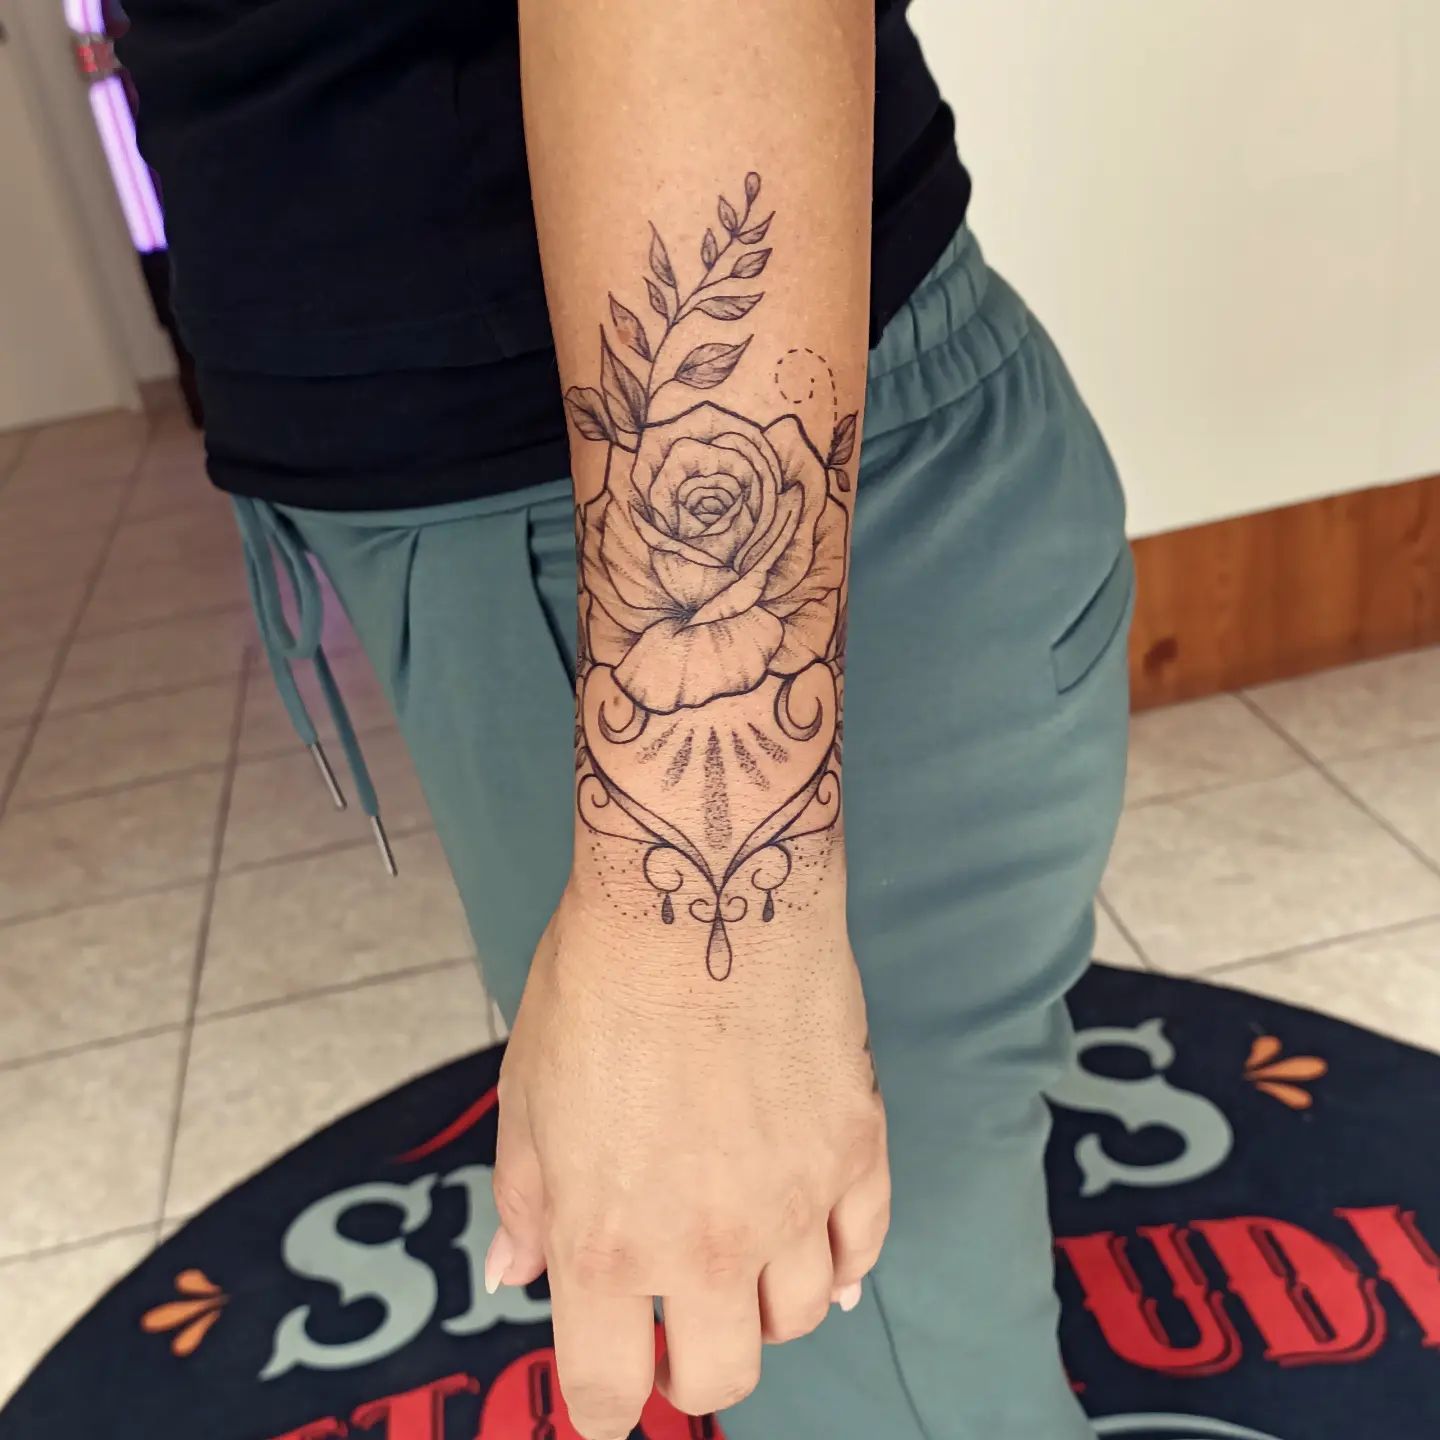 30+ Arm Tattoo Ideas for Women: Best Designs with Meaning - 100 Tattoos